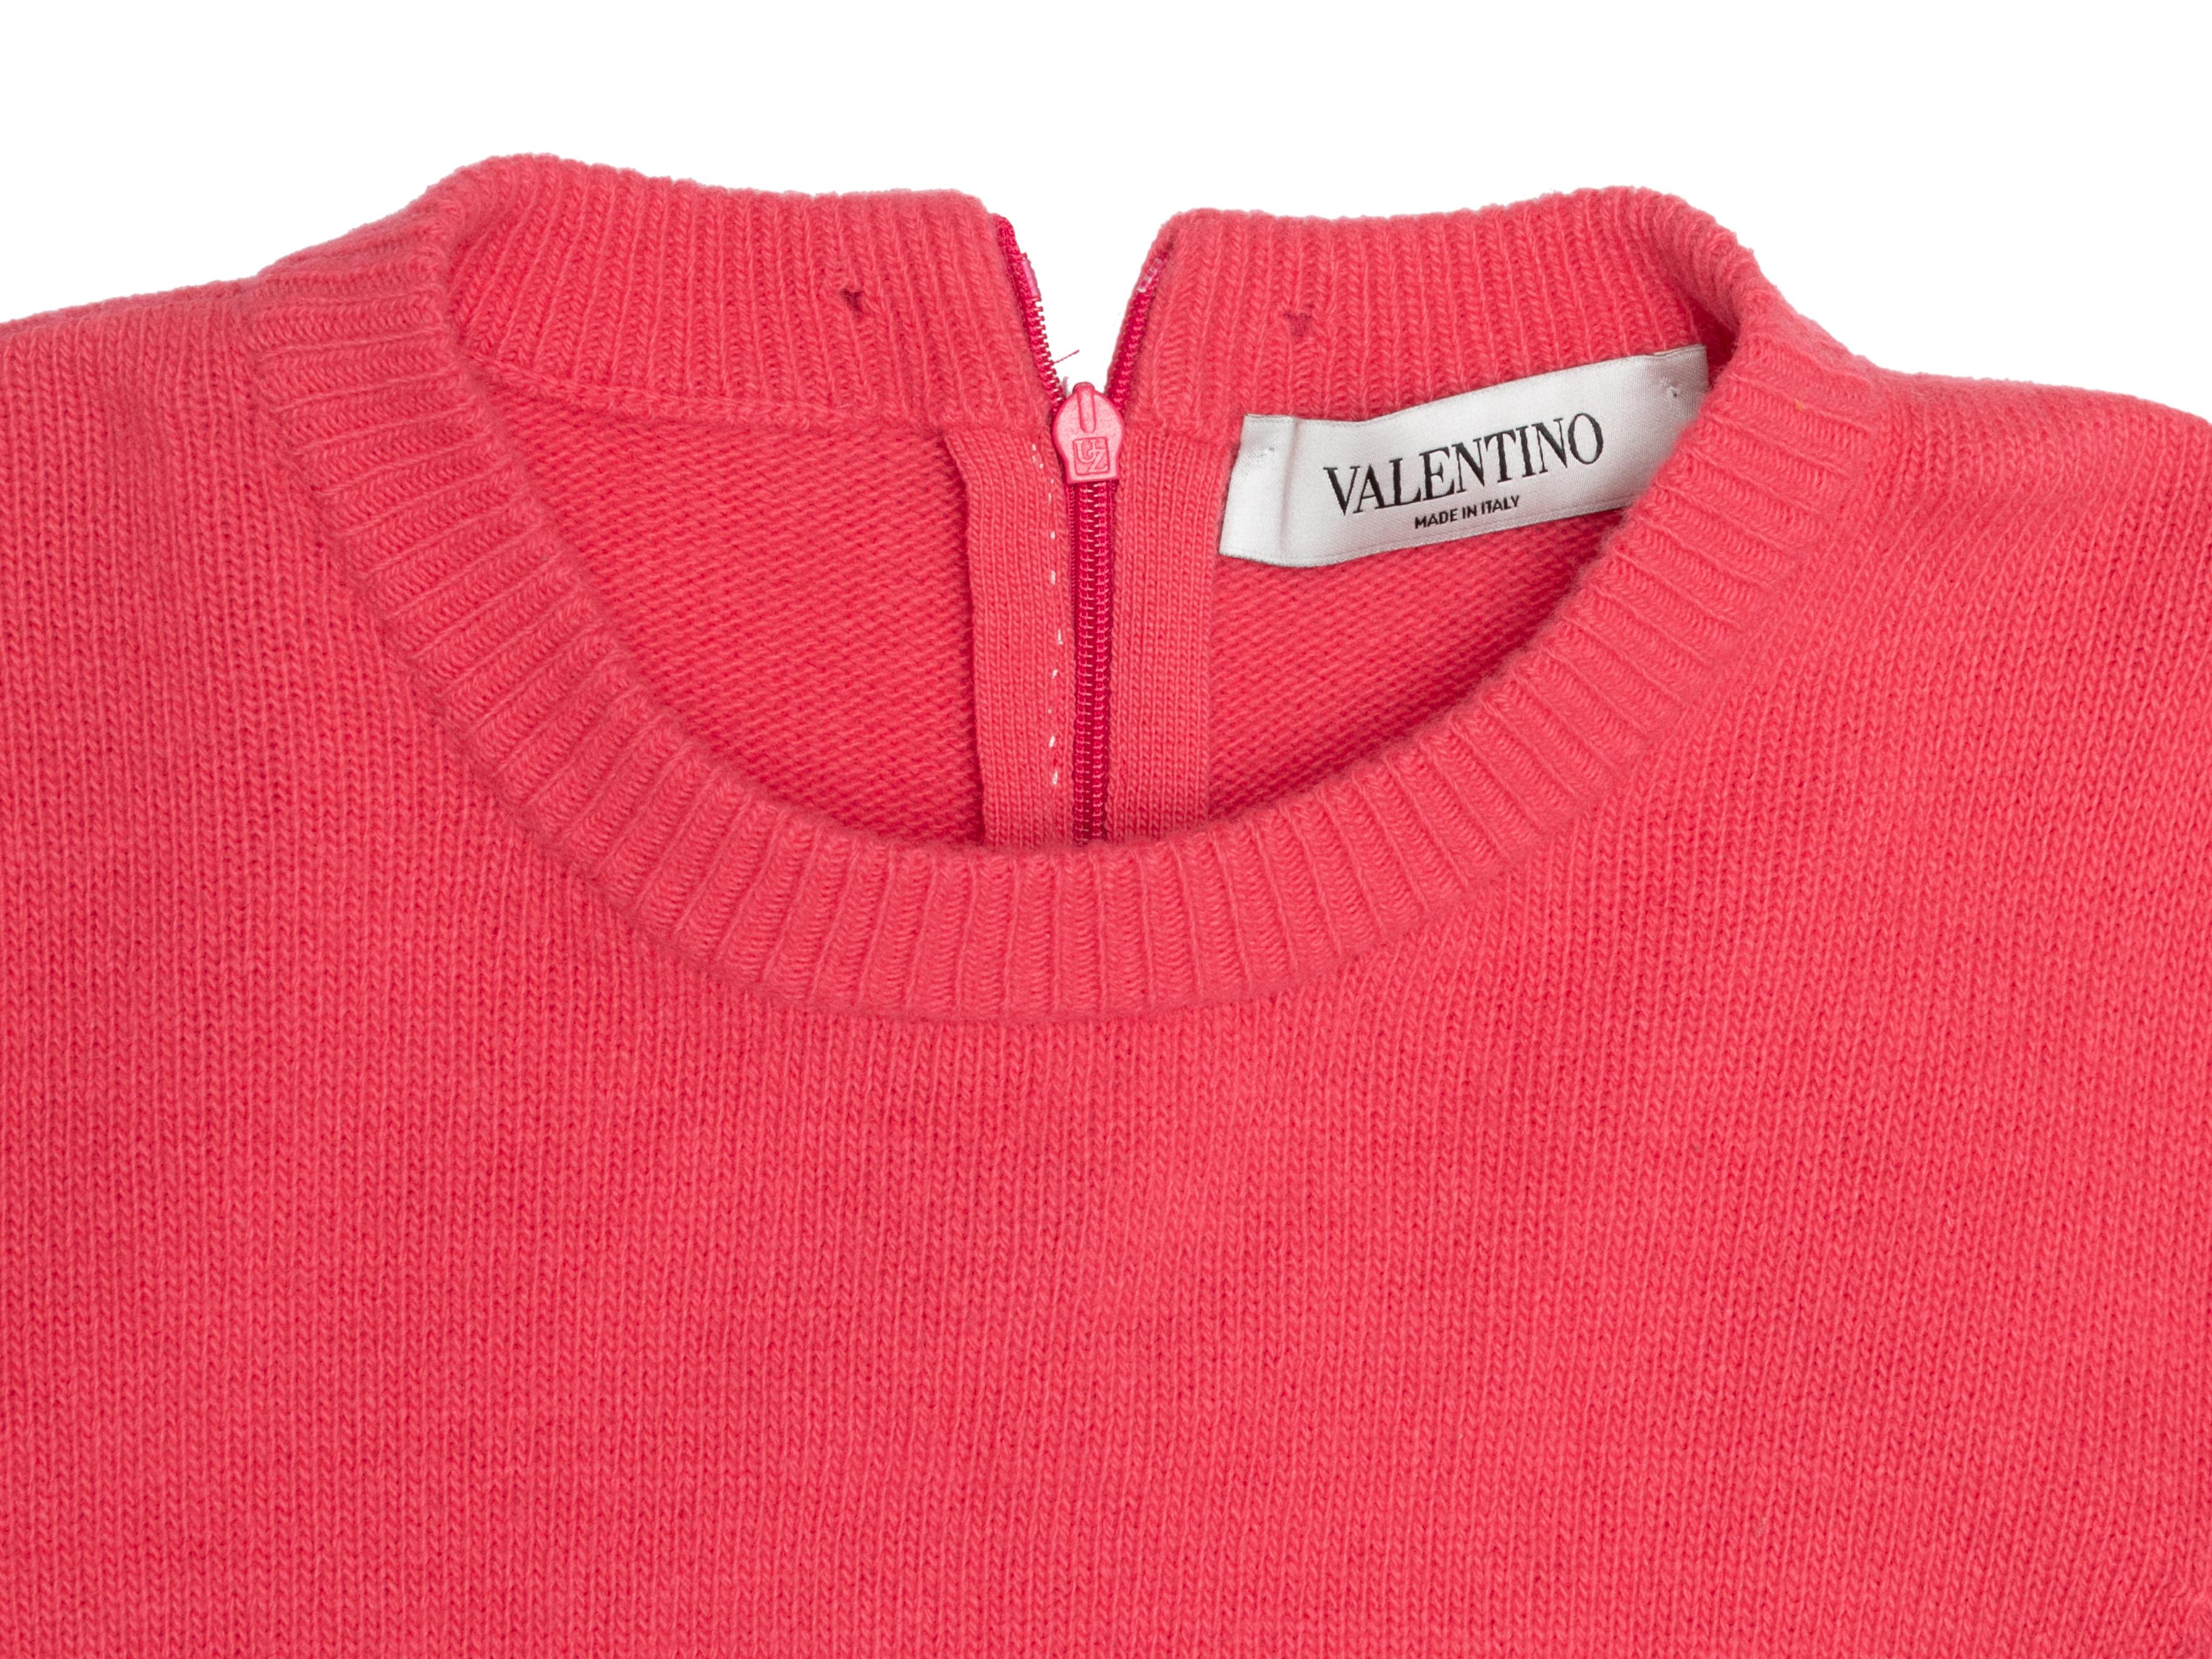 Hot Pink Valentino Virgin Wool & Cashmere Sweater Size US XS For Sale 3